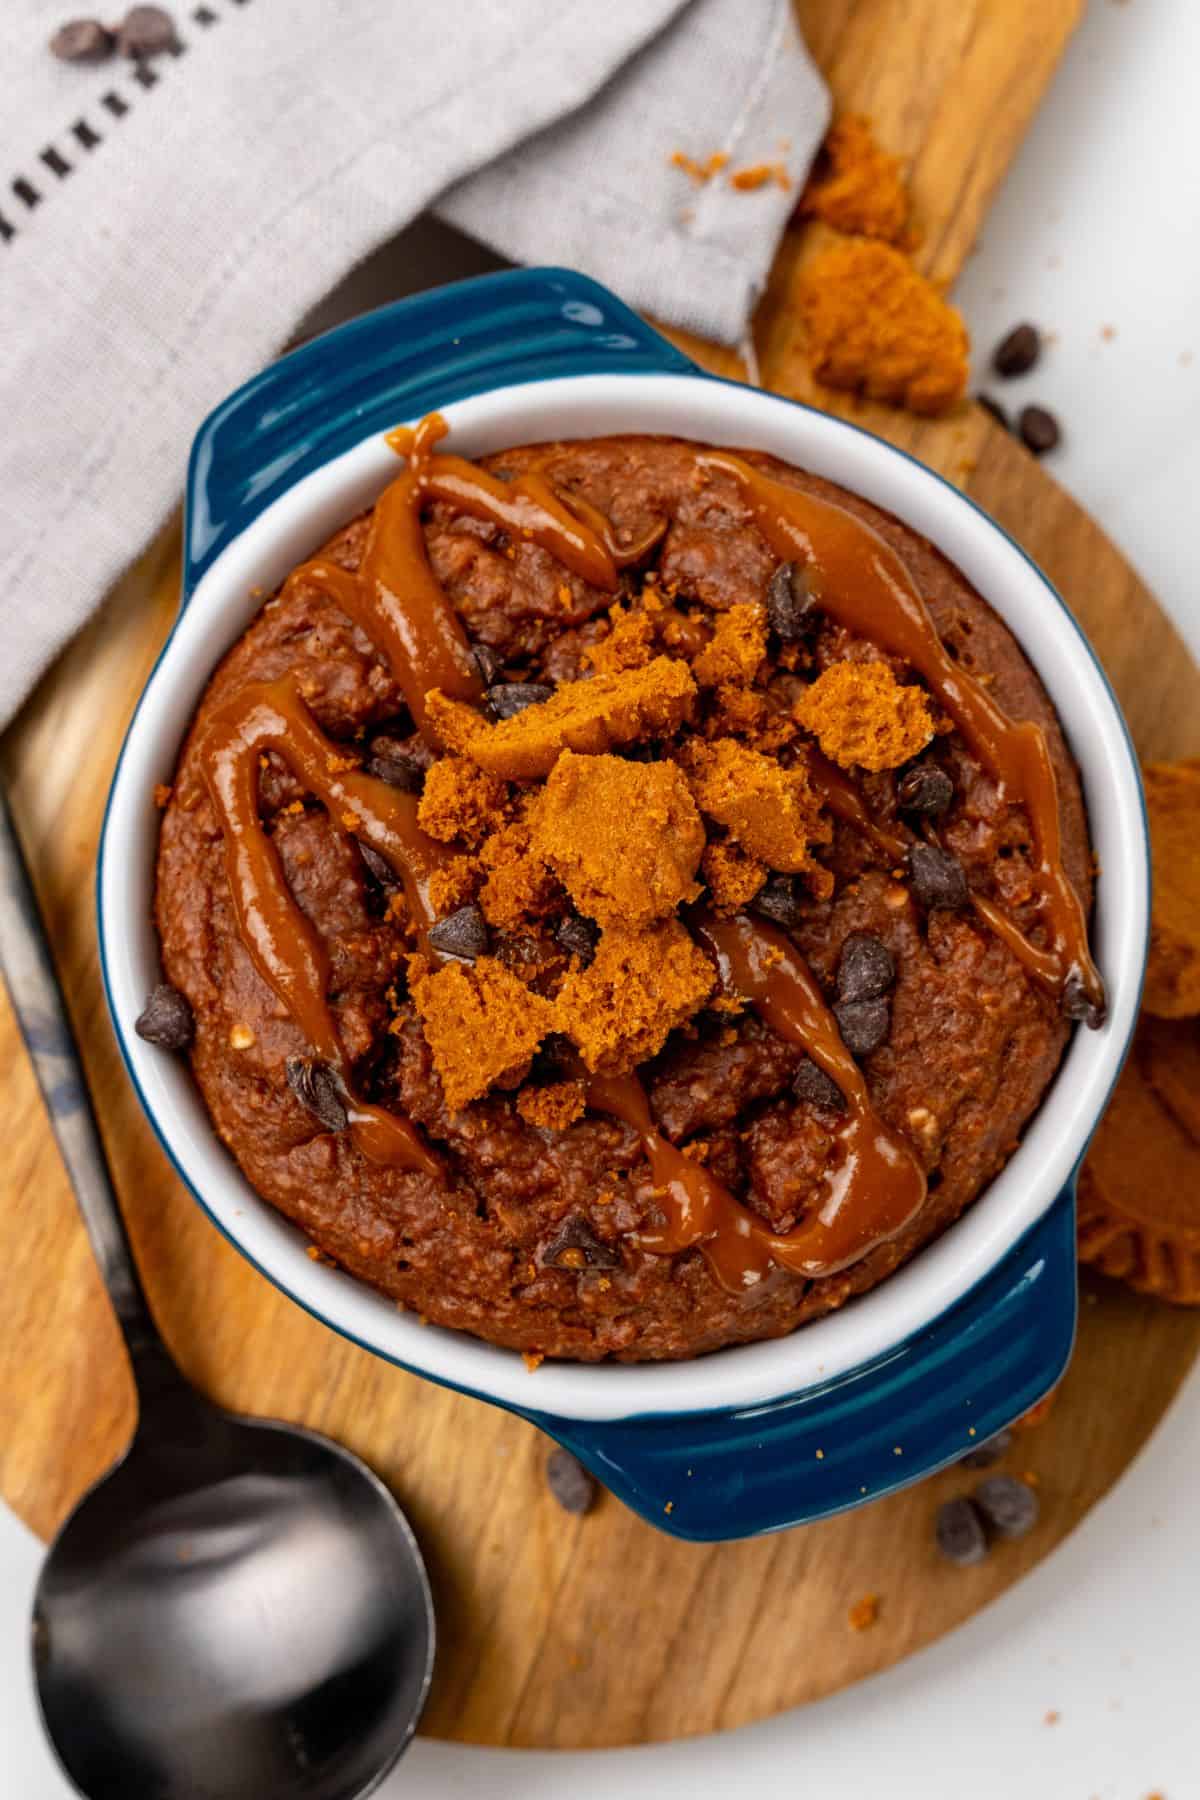 Biscoff baked oats with toppings in a ramekin dish. 